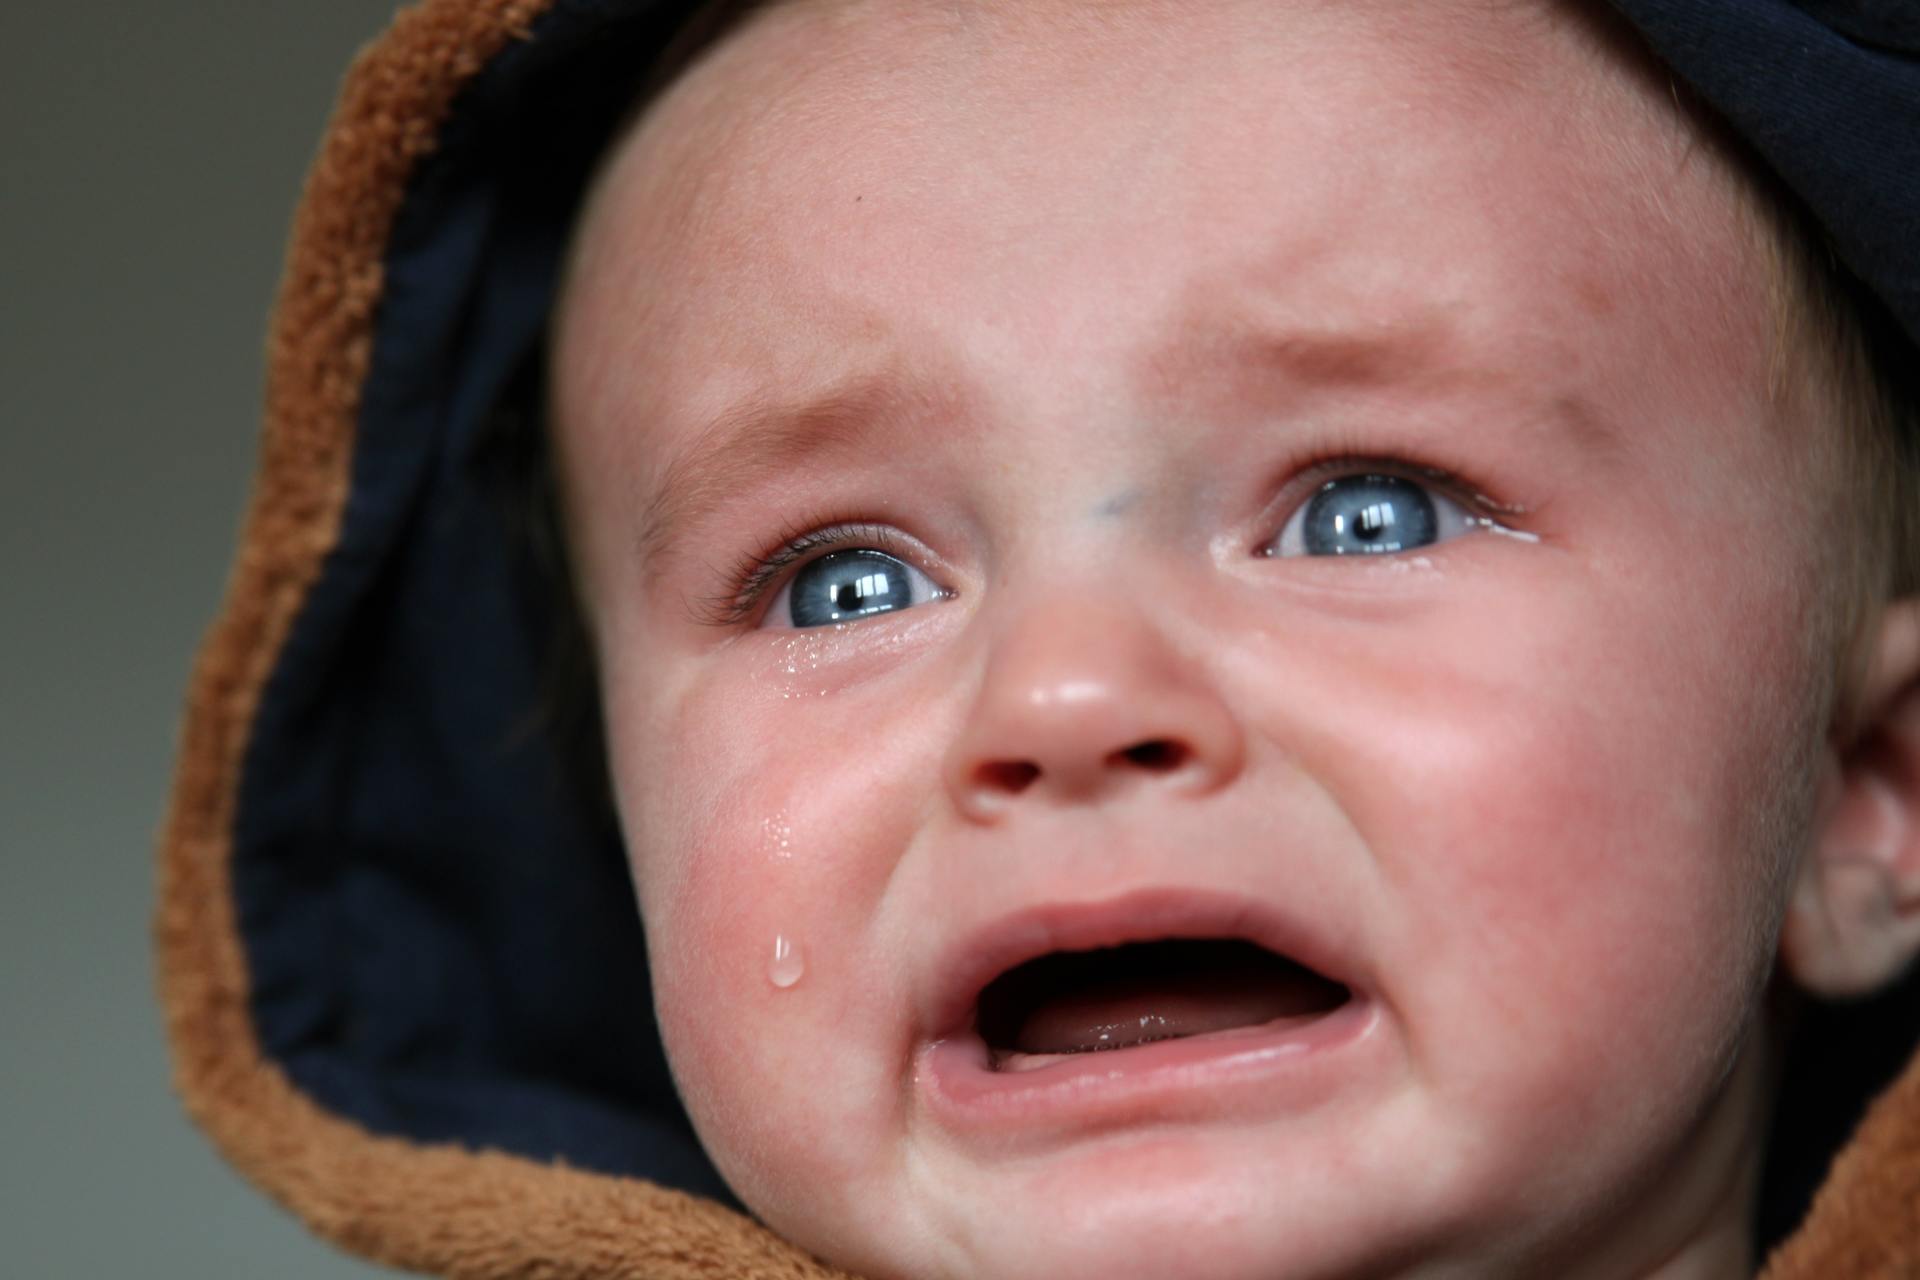 Up close of crying baby